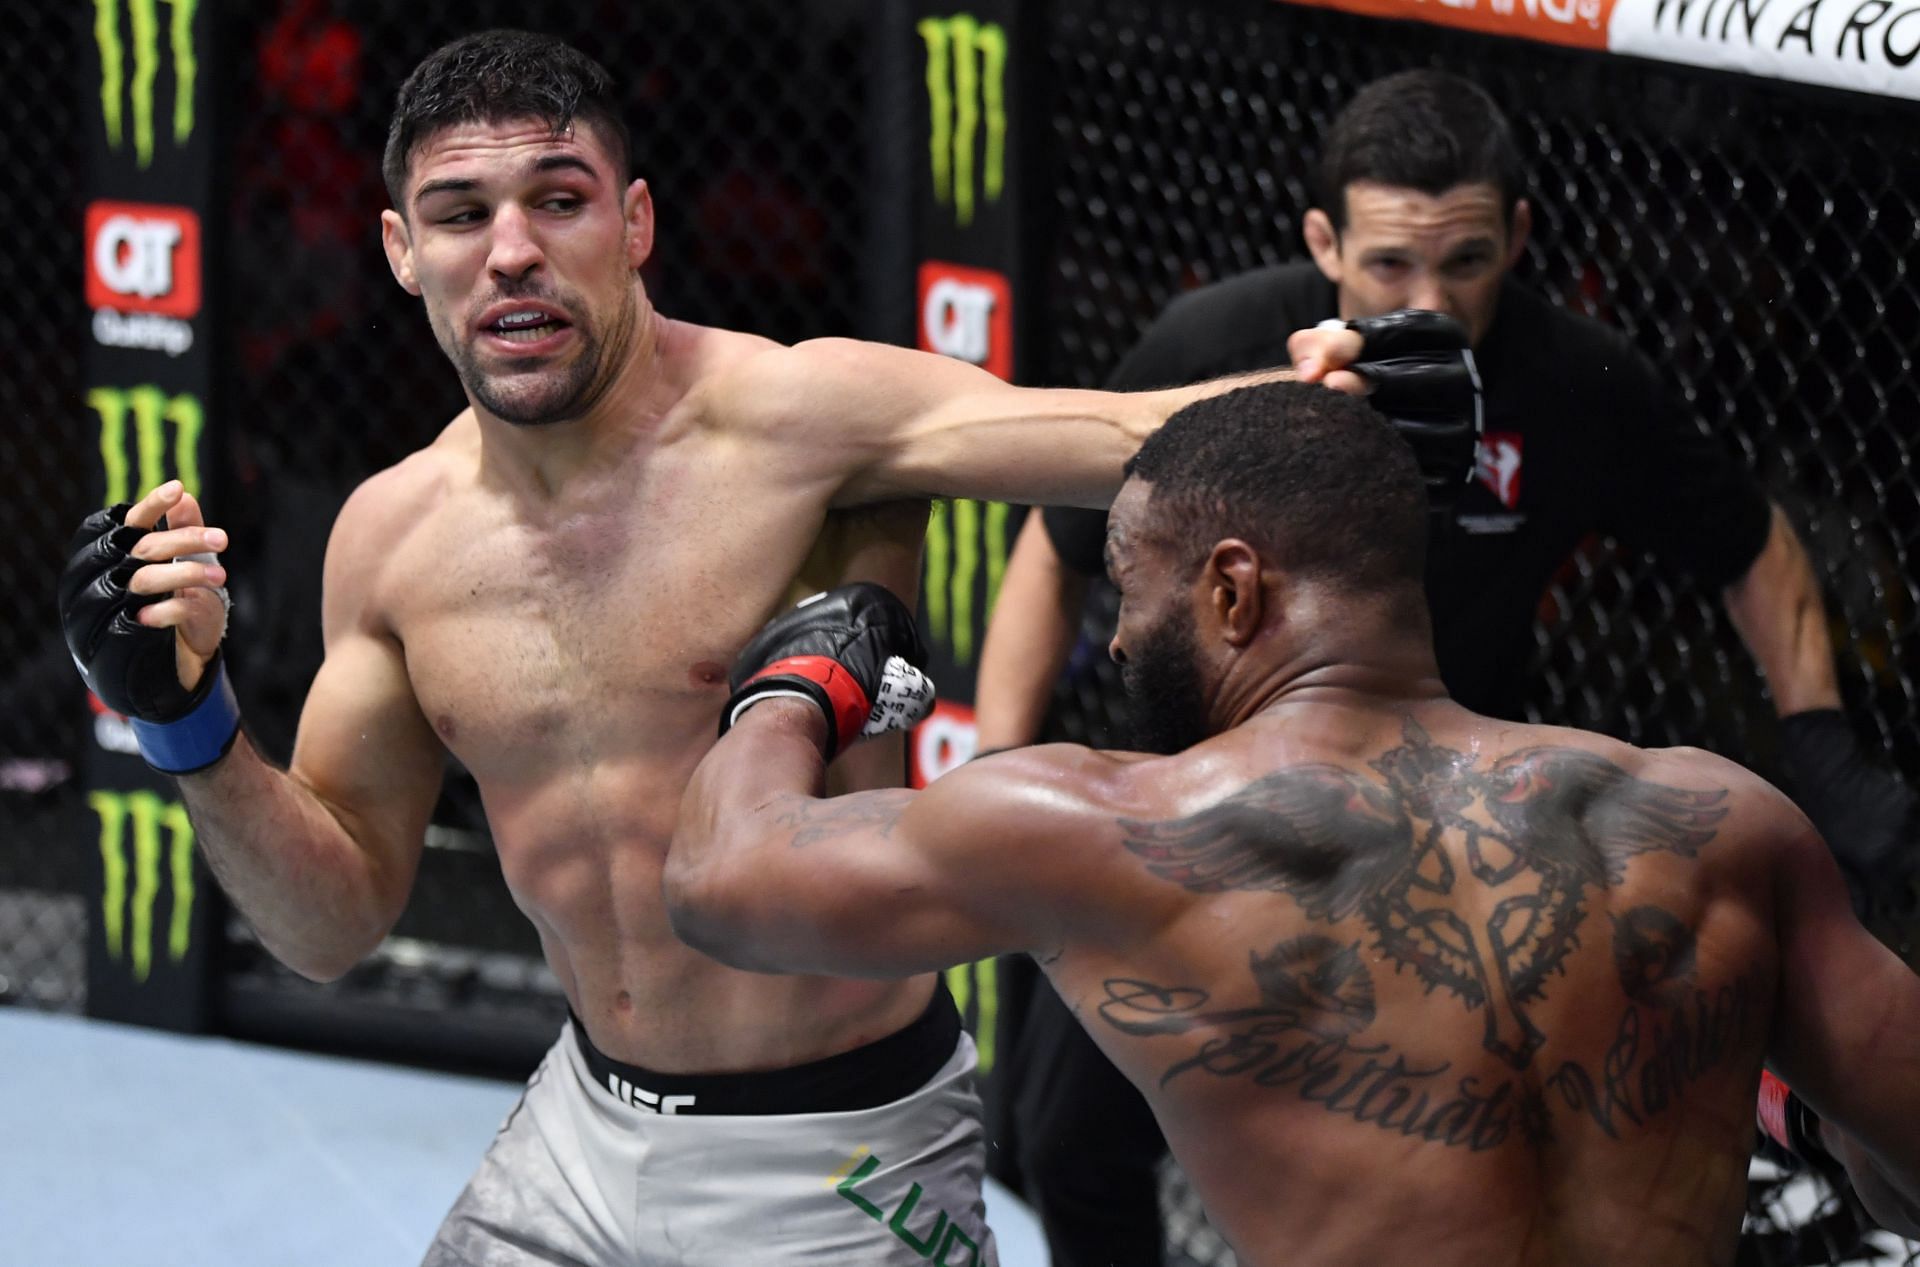 Vicente Luque is probably the deadliest finisher in the welterweight division right now